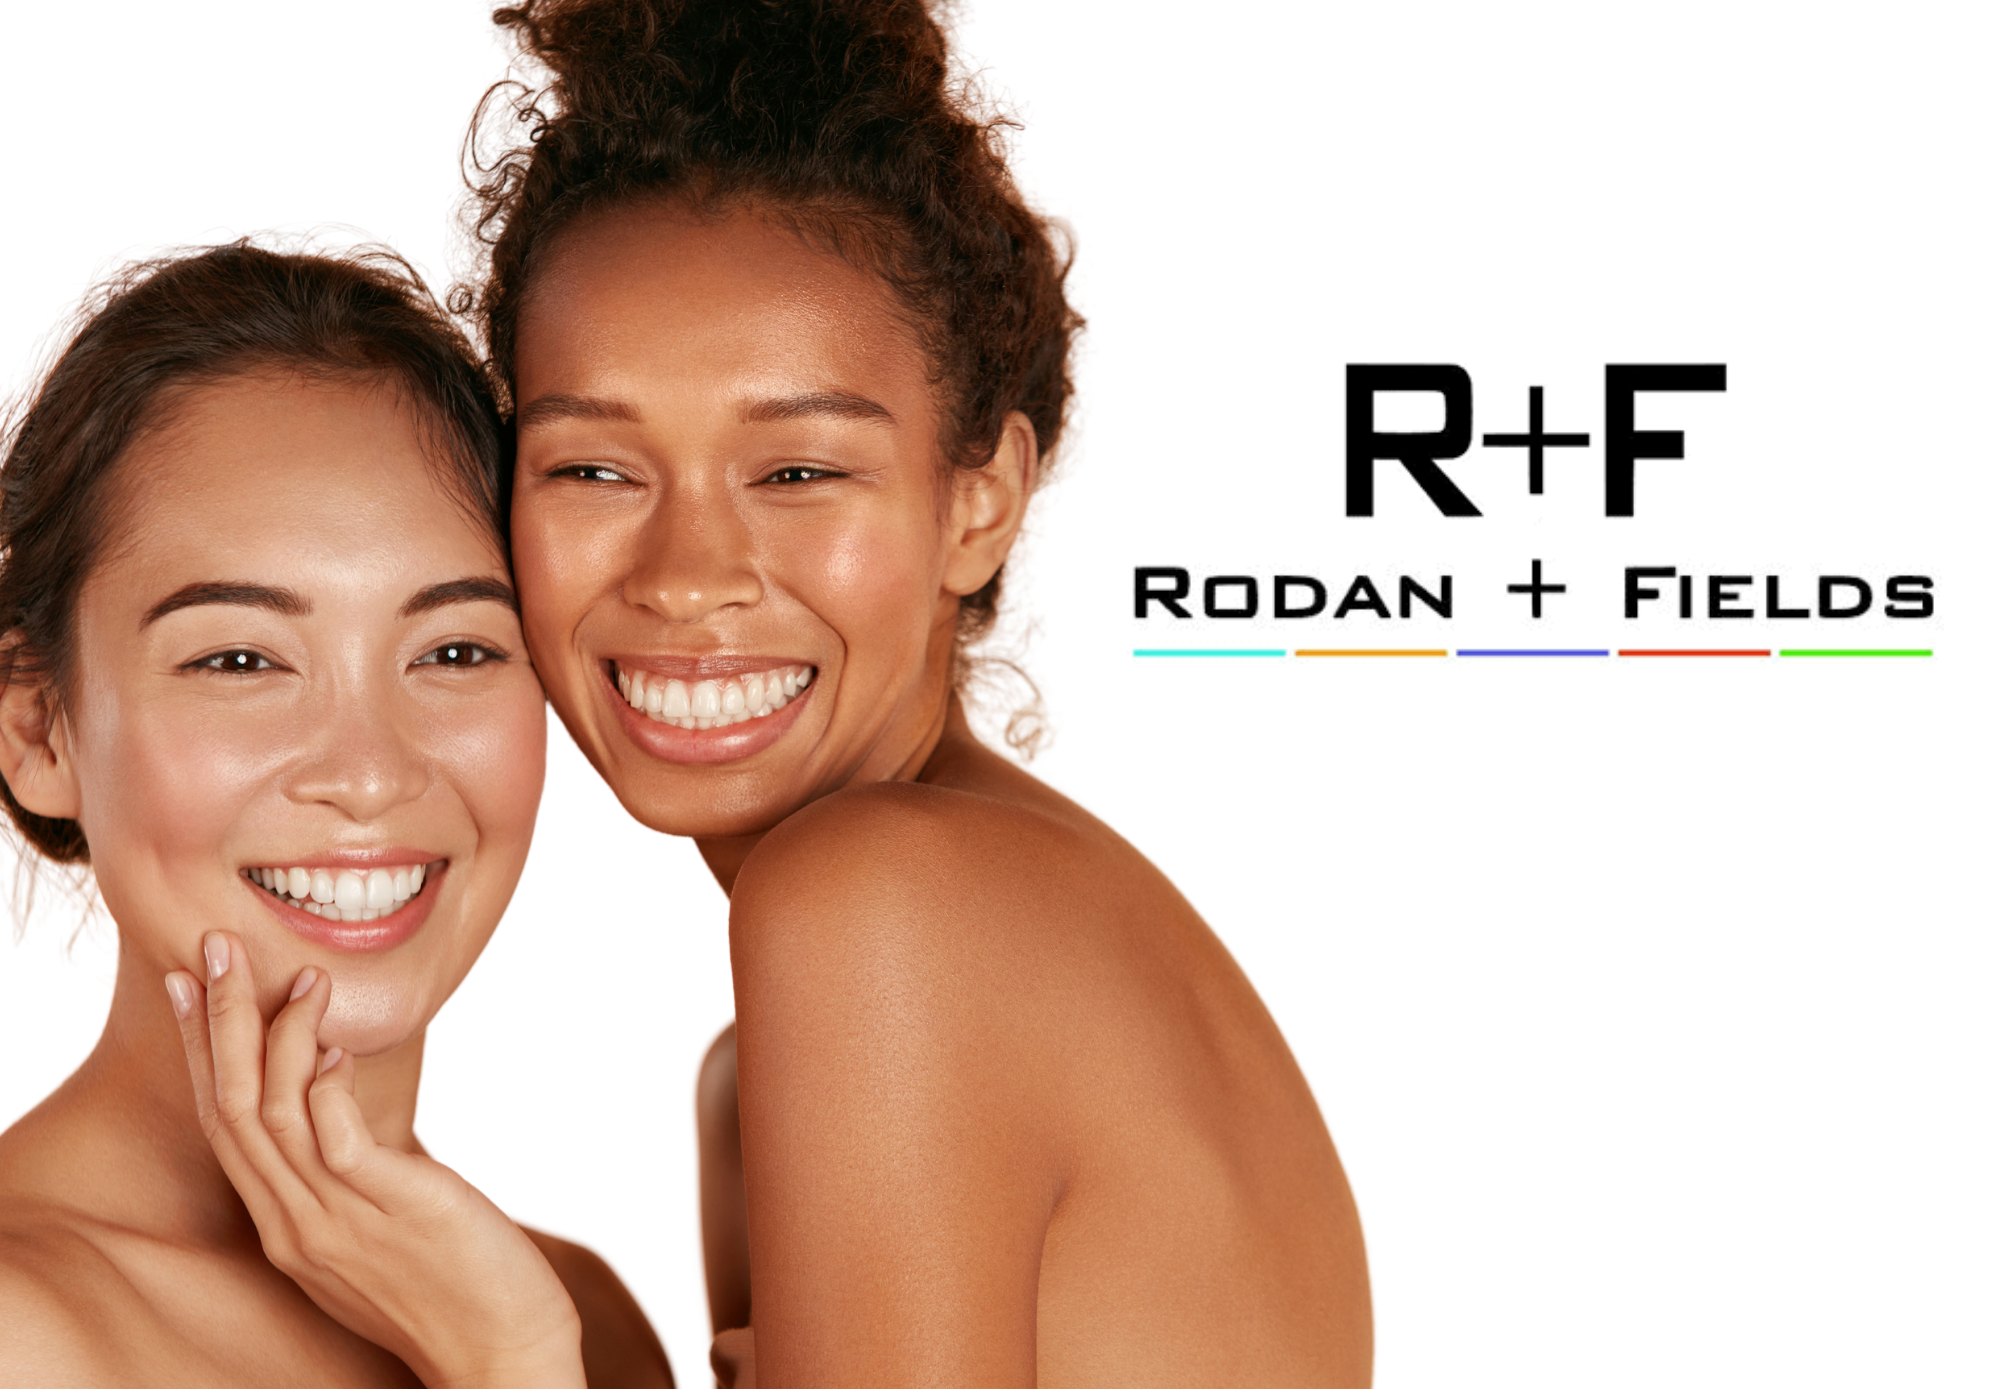 Rodan and fields skin care products.